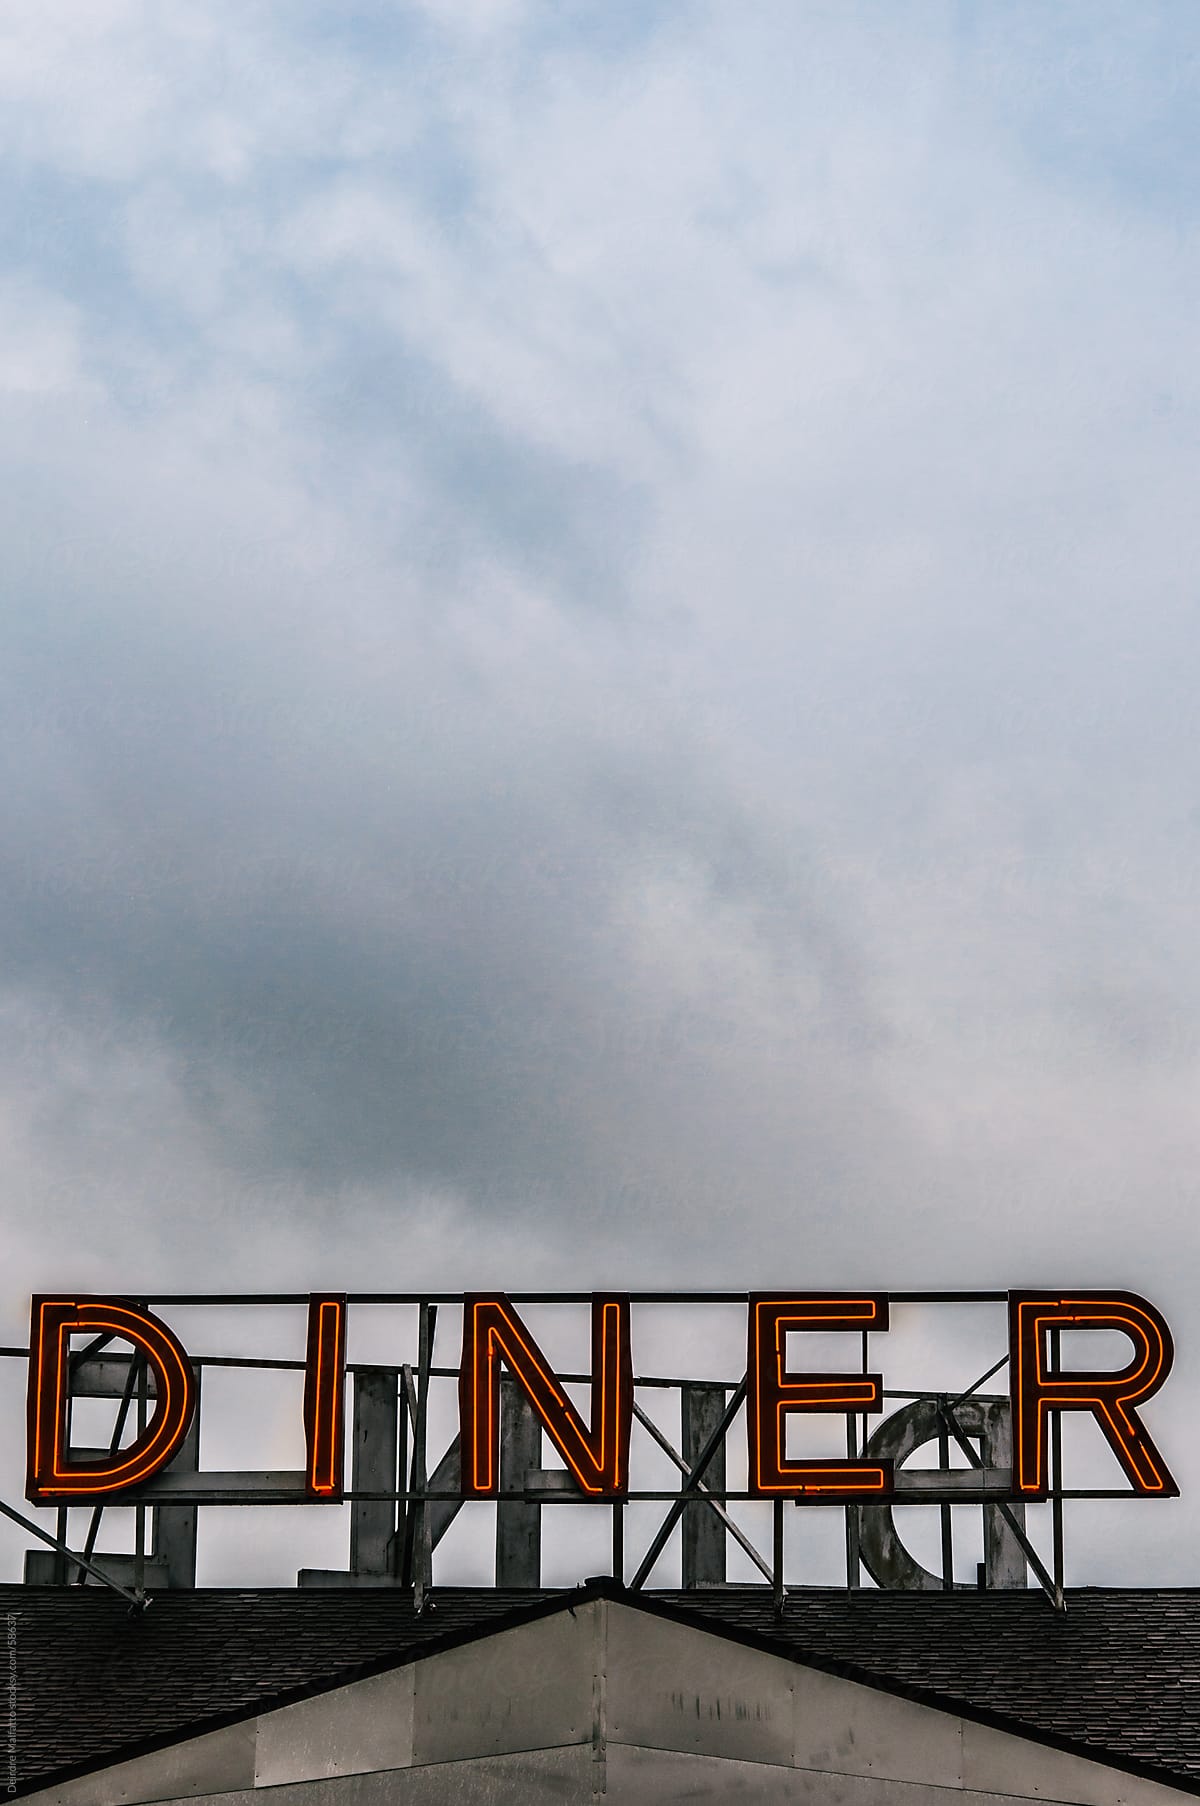 Red neon diner sign on a roof against clouds